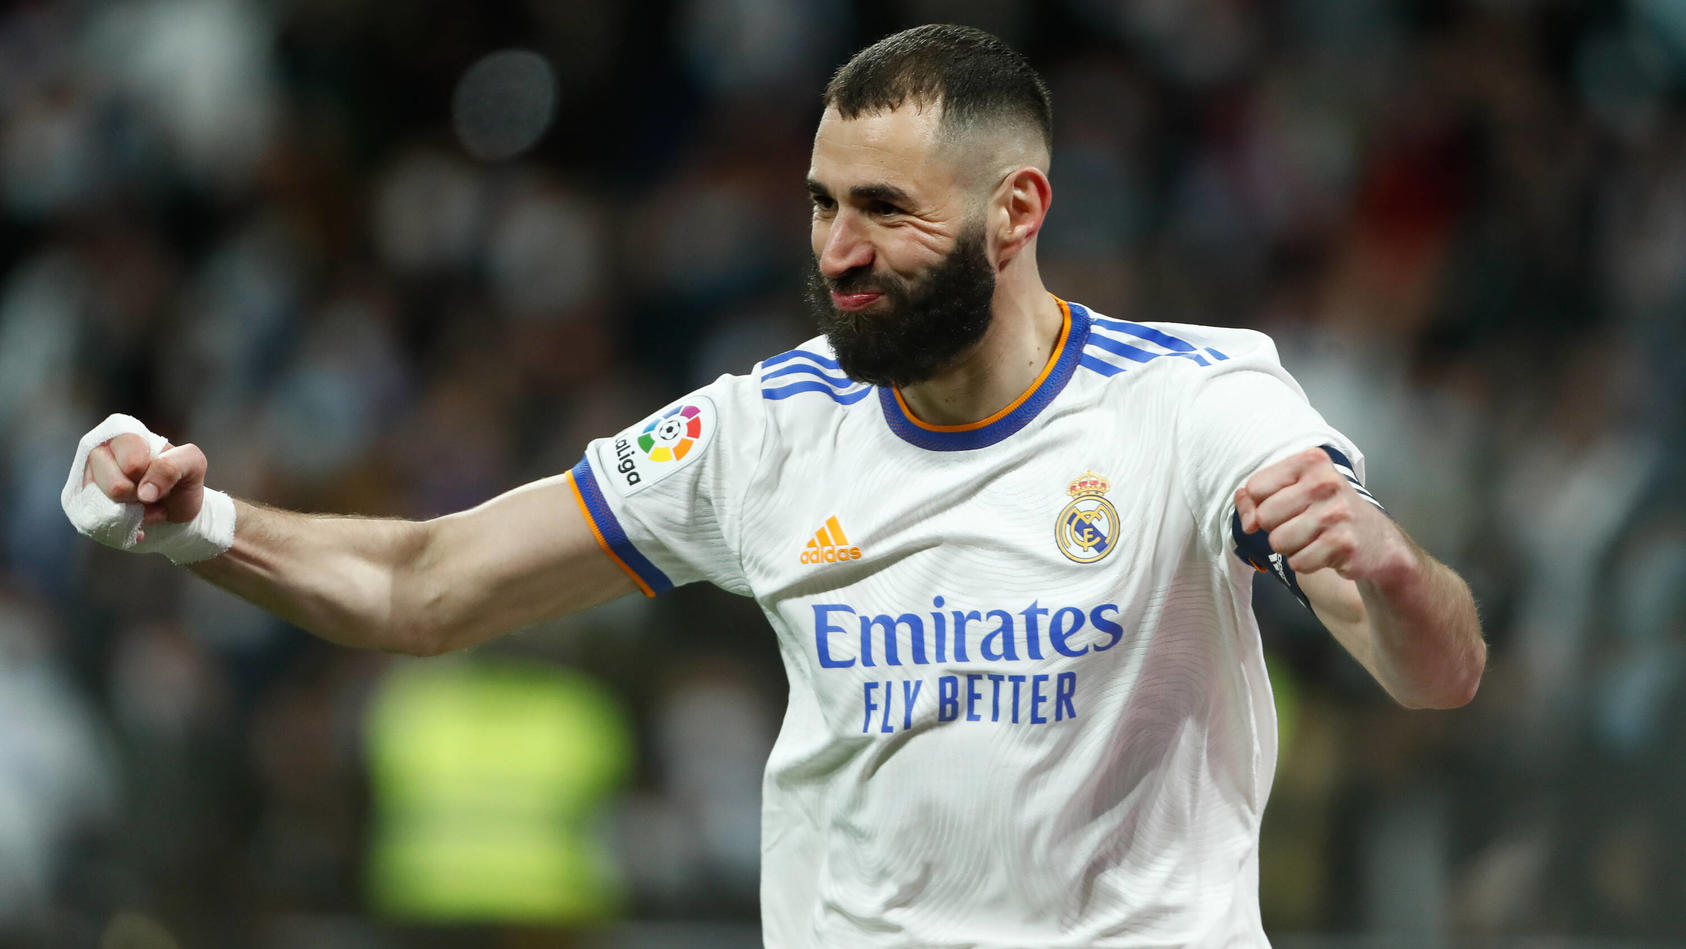  March 5, 2022, MADRID, MADRID, SPAIN: Karim Benzema of Real Madrid celebrates a goal during the spanish league, La Liga Santander, football match played between Real Madrid and Real Sociedad at Santiago Bernabeu stadium on March 05, 2022, in Madrid,